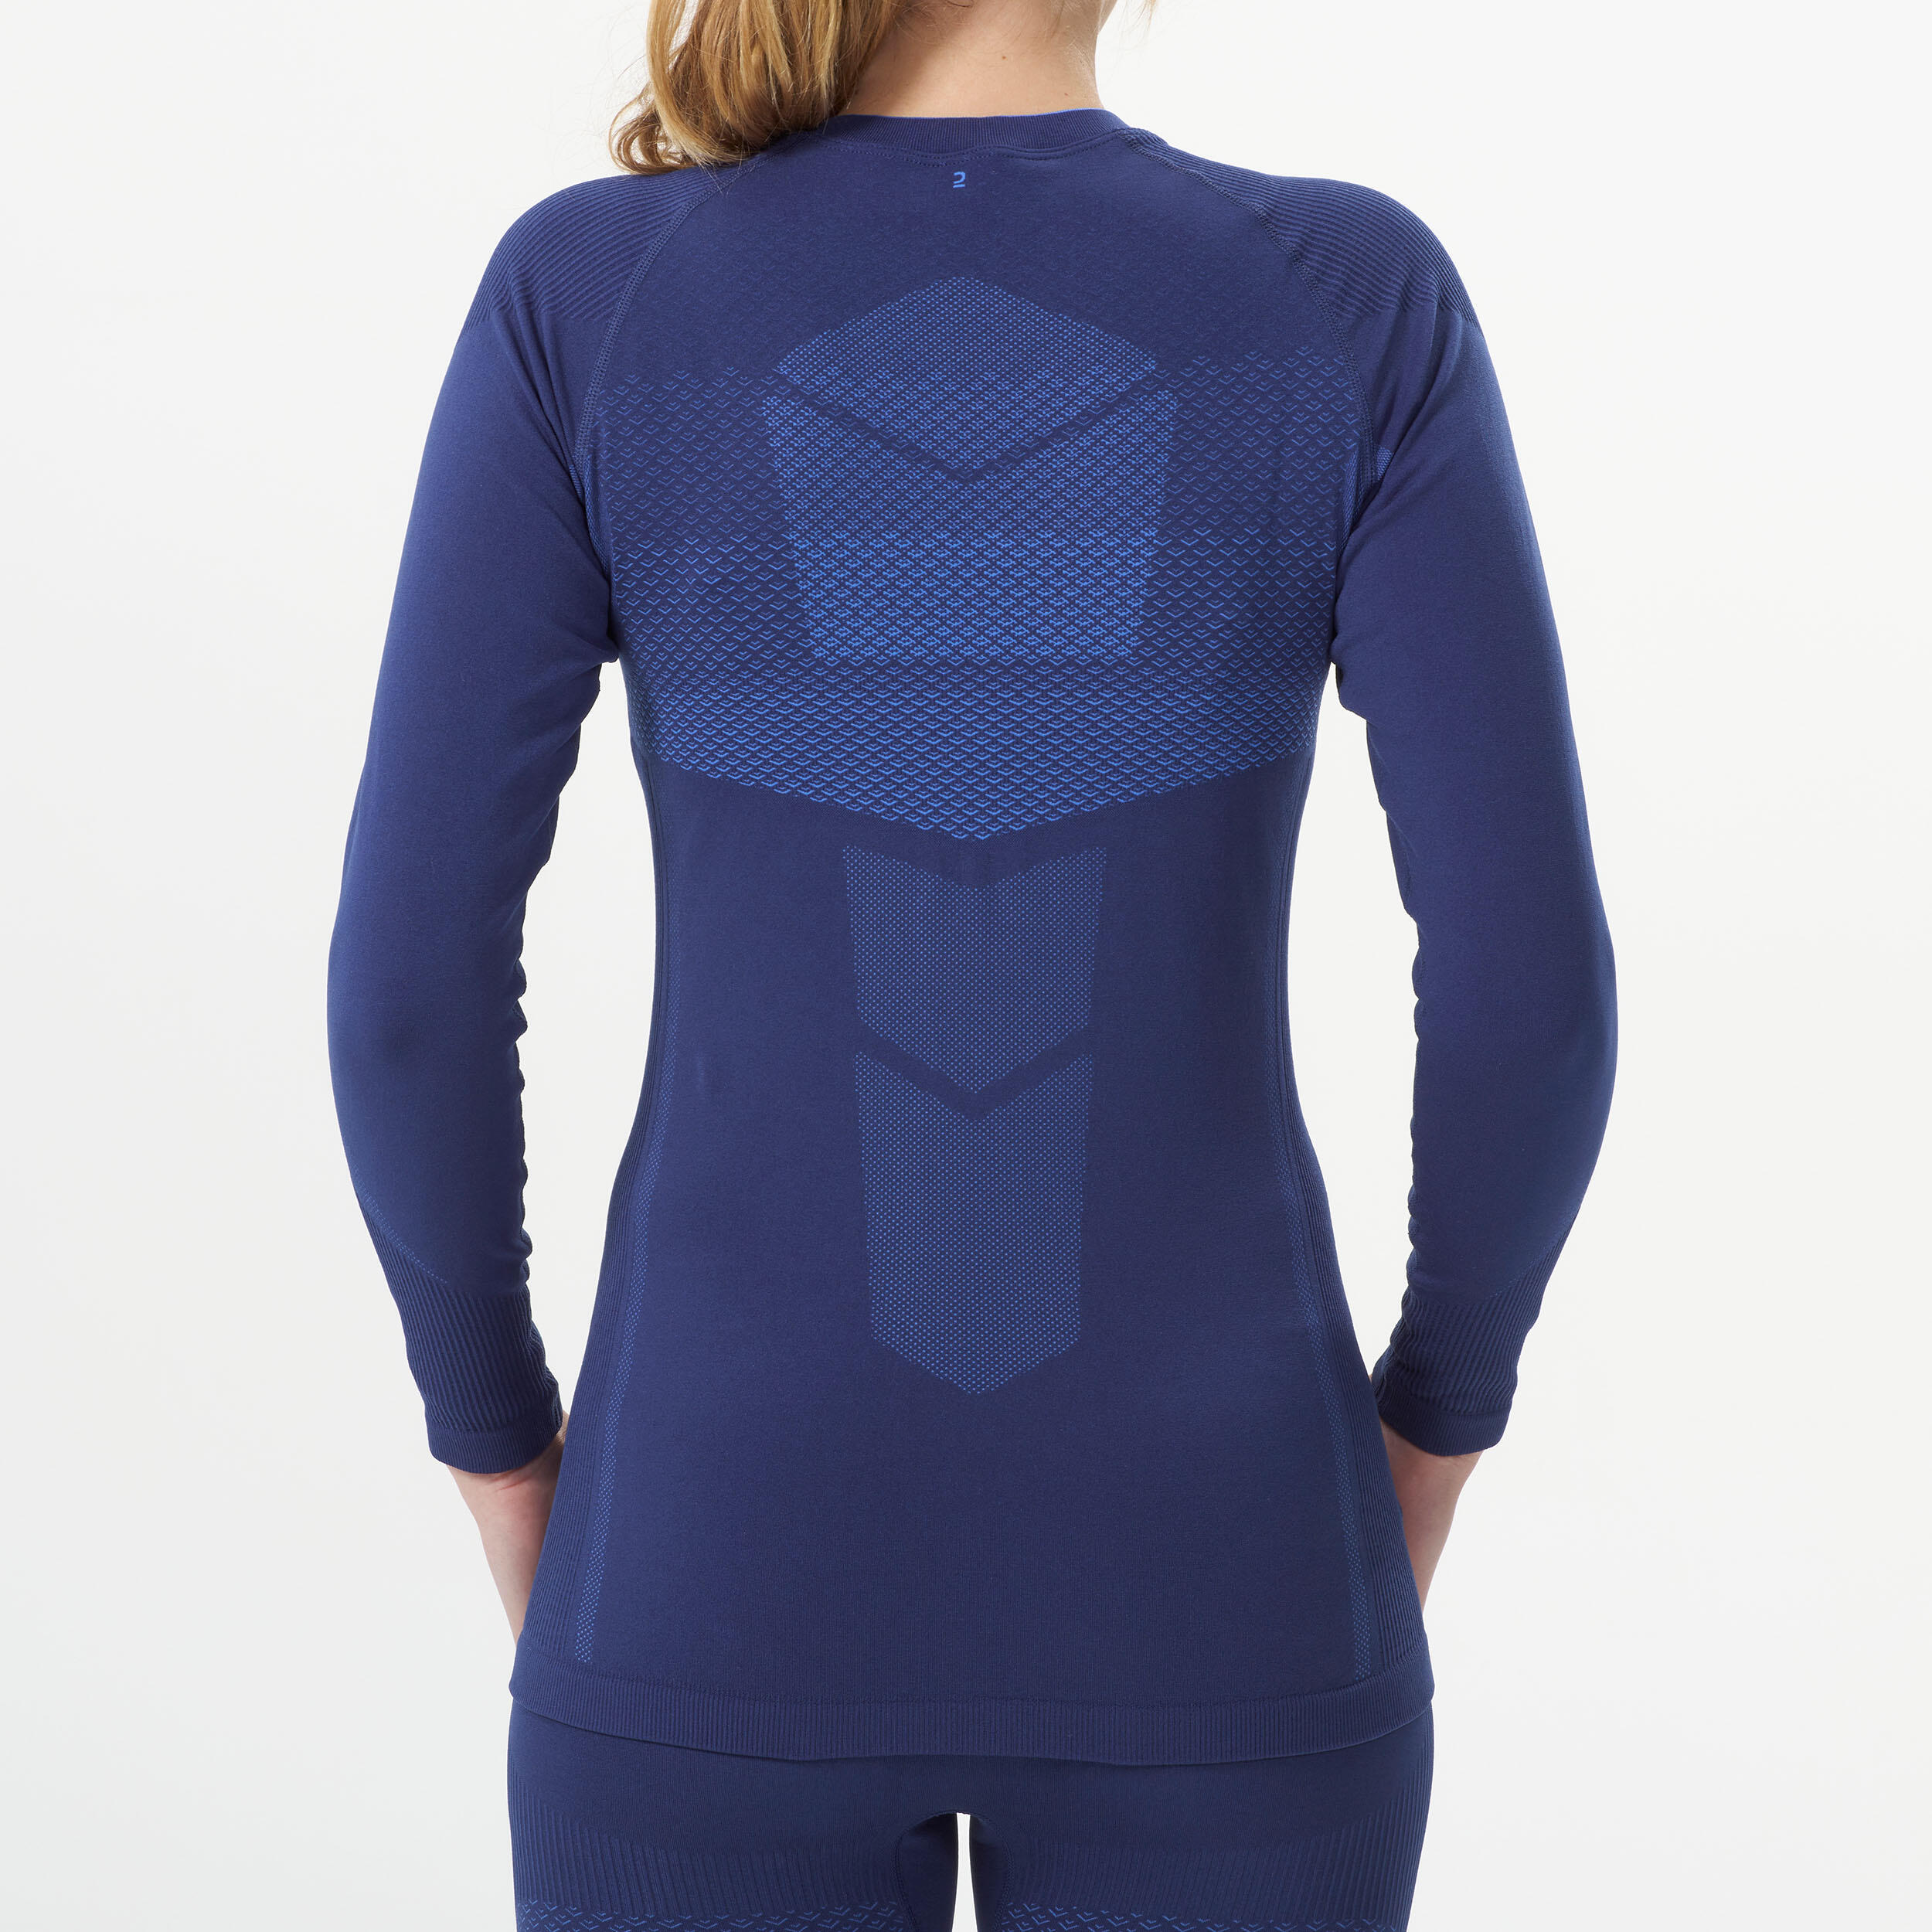 WOMEN’S THERMAL CROSS-COUNTRY SKI BASE LAYER 900 – BLUE 5/7